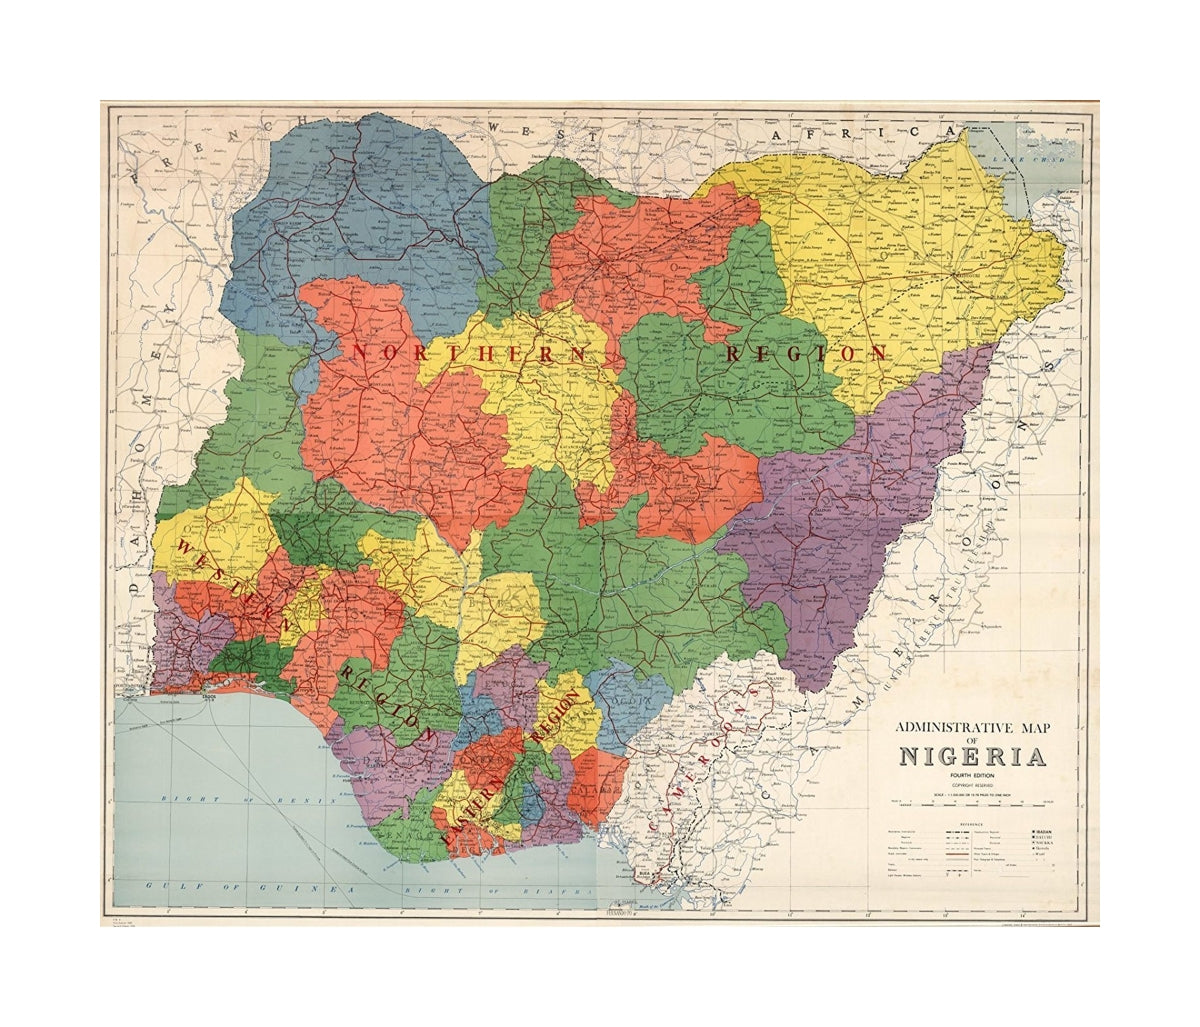 Administrative Map of Nigeria., Administrative Map of Nigeria., See Note field above.